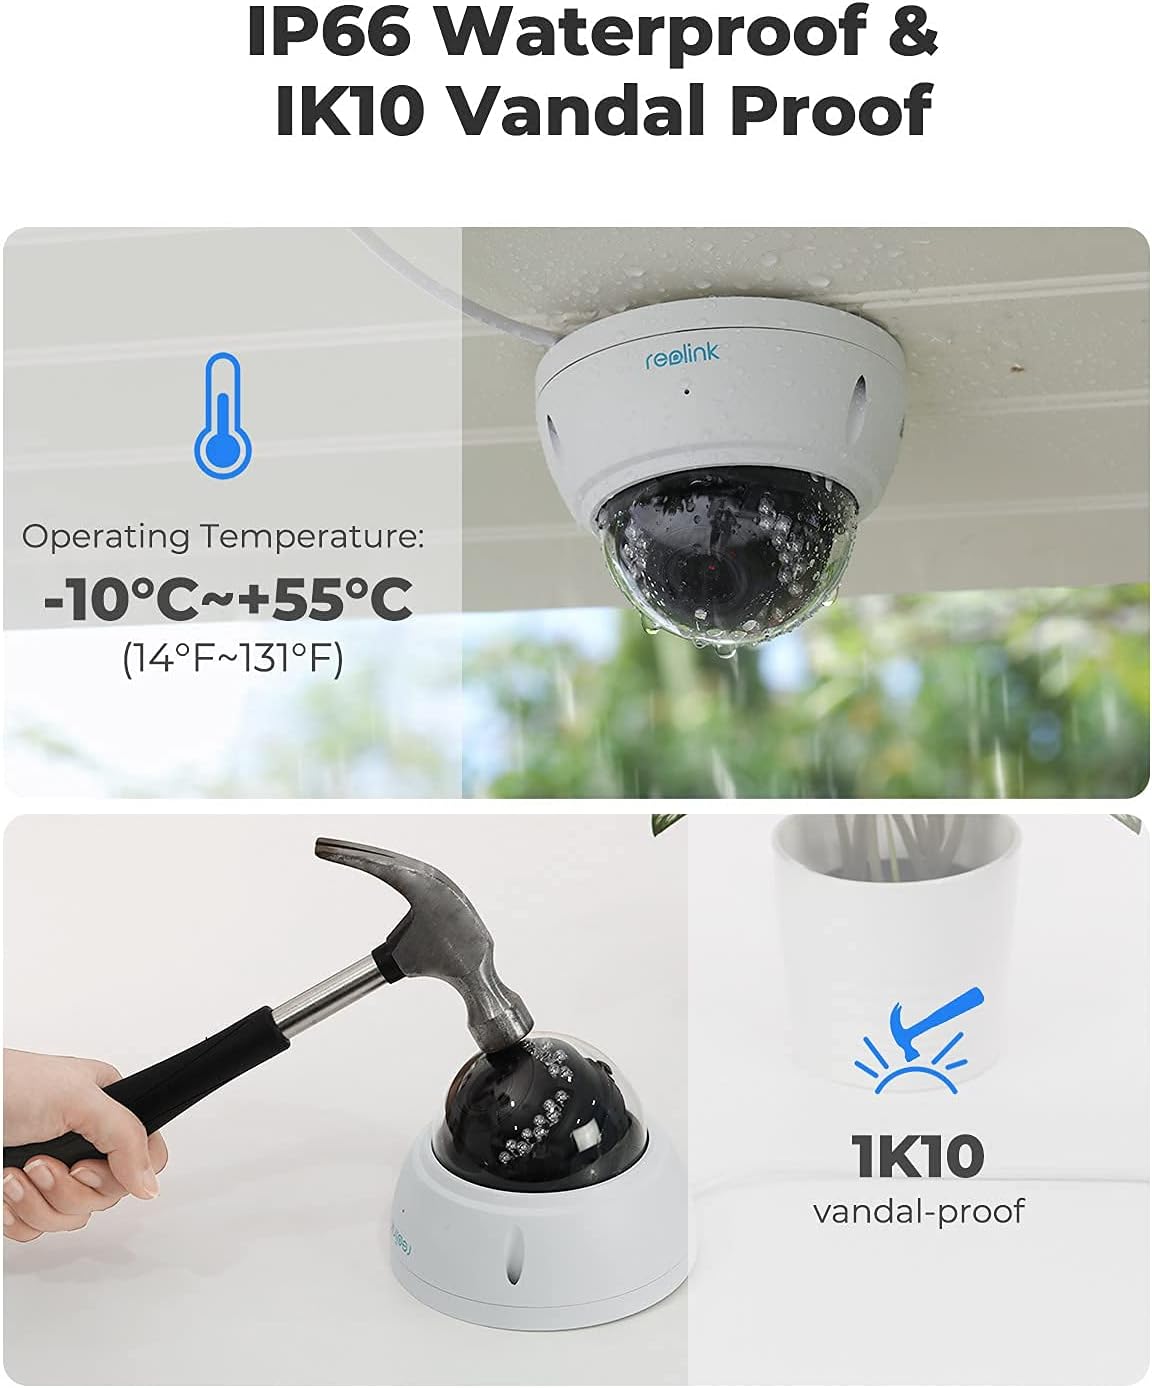 REOLINK RLC-842A Video Surveillance Camera: High-Resolution 4K (3840 x 2160) - 20fps, Adjustable Dual Lens (2.8mm + 8mm), Night Range up to 15m, Two-Way Audio, Motion Detection with People and Vehicle Detection, Free Phone App Included - Spy-shop.com